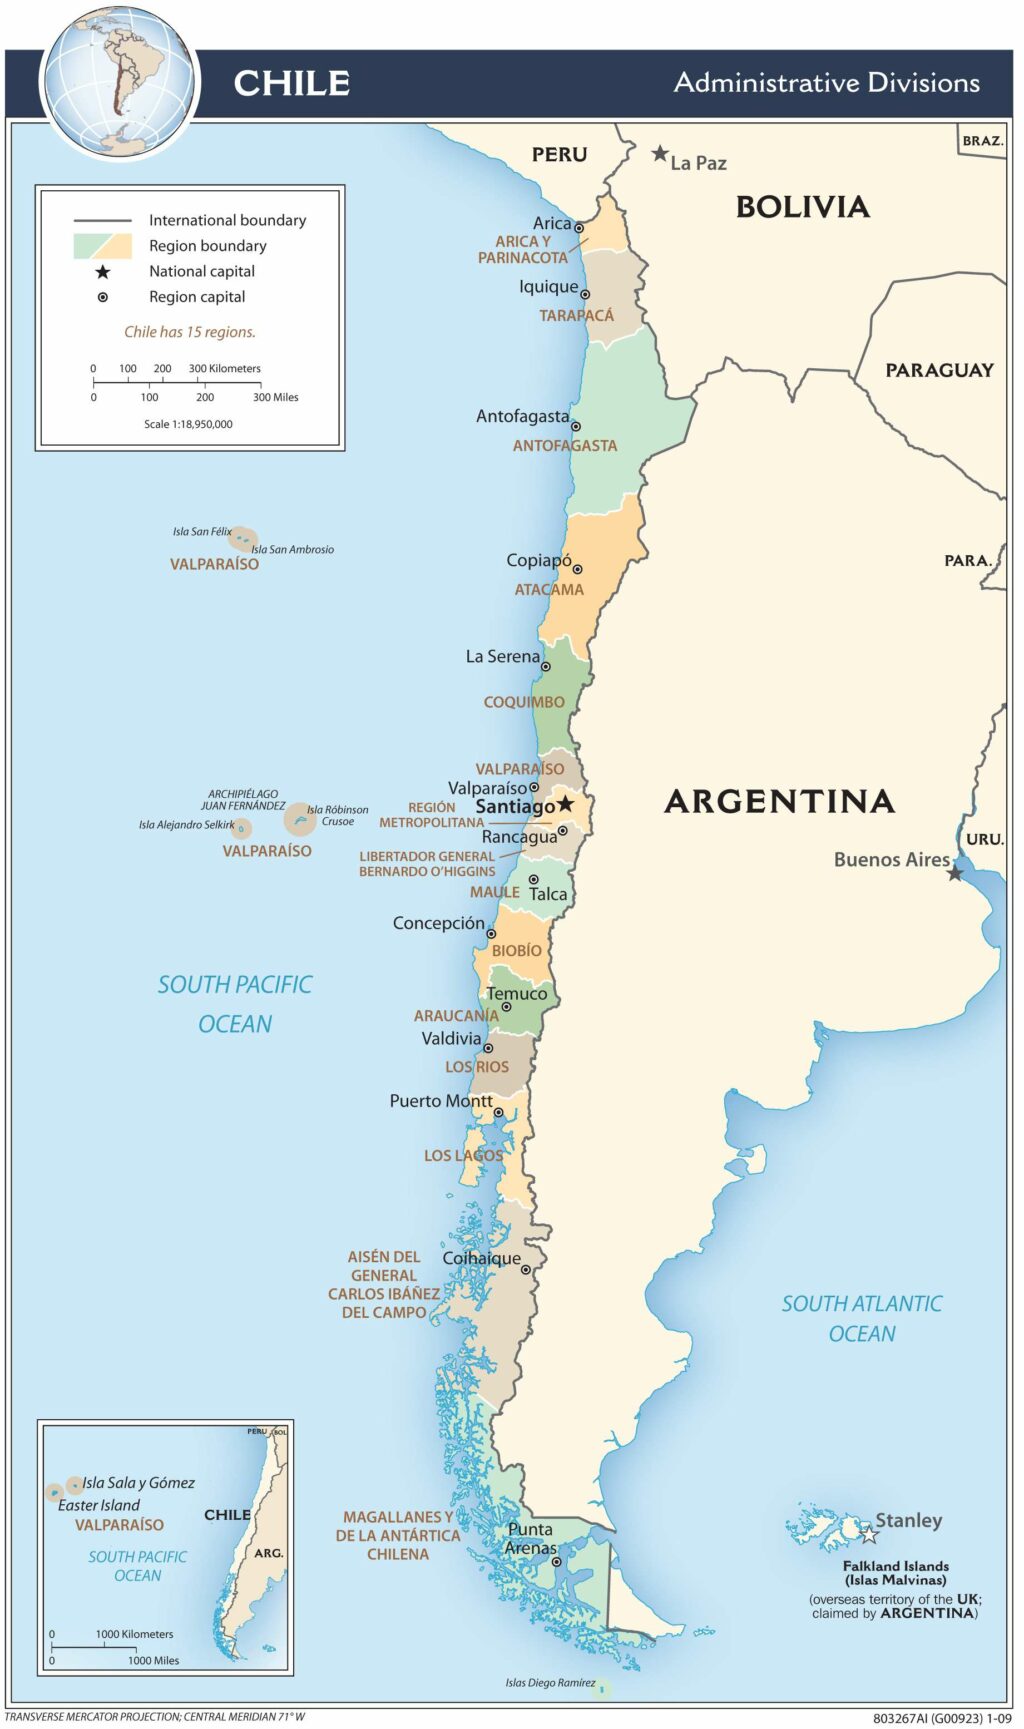 Chile administrative map.